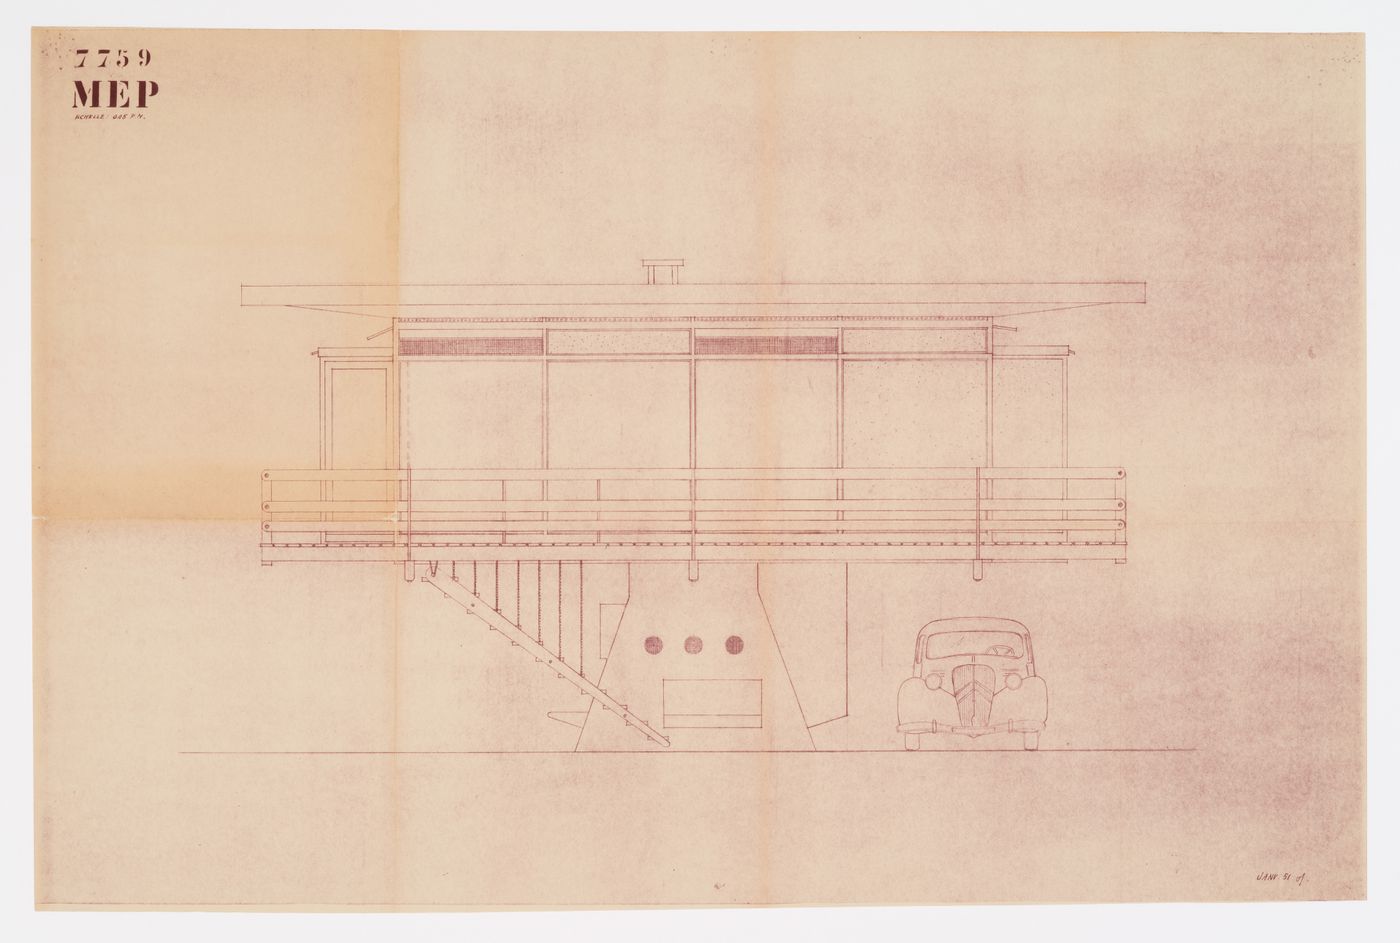 Elevation for the Villa MEP